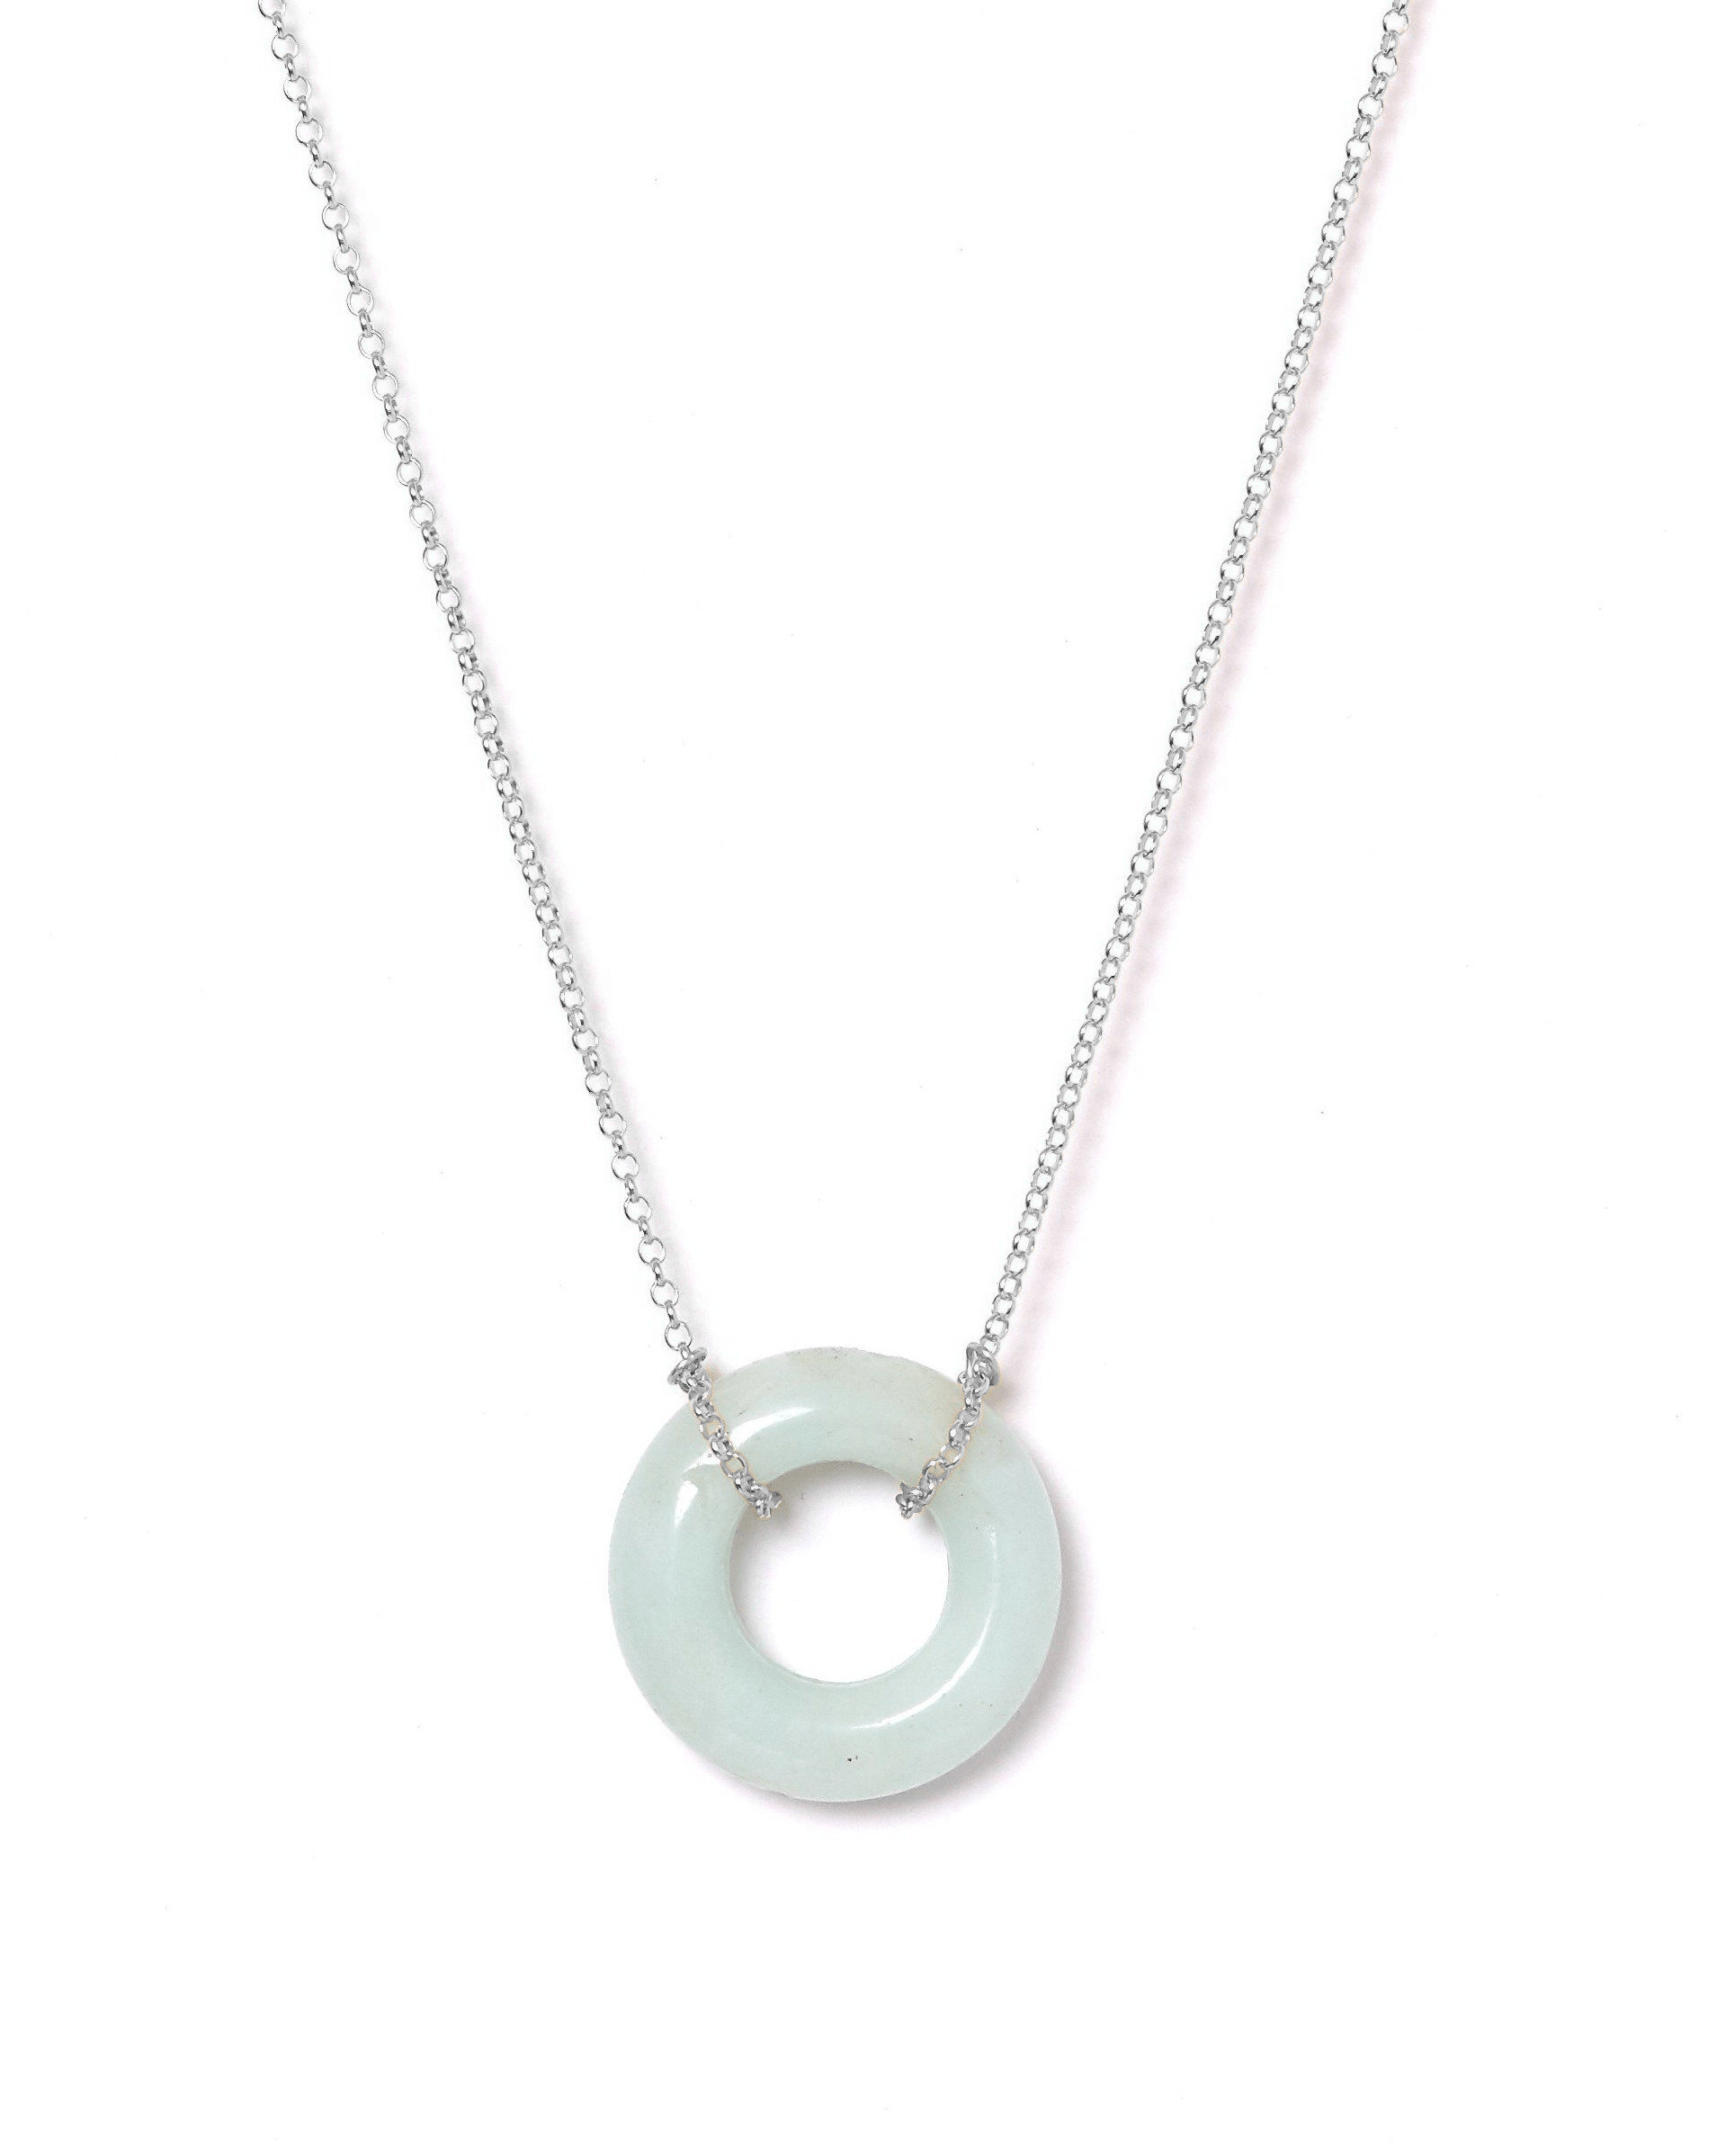 Cerceau Necklace by KOZAKH. A 17 inch long necklace in Sterling Silver, featuring a doughnut shape Amazonite gemstone.